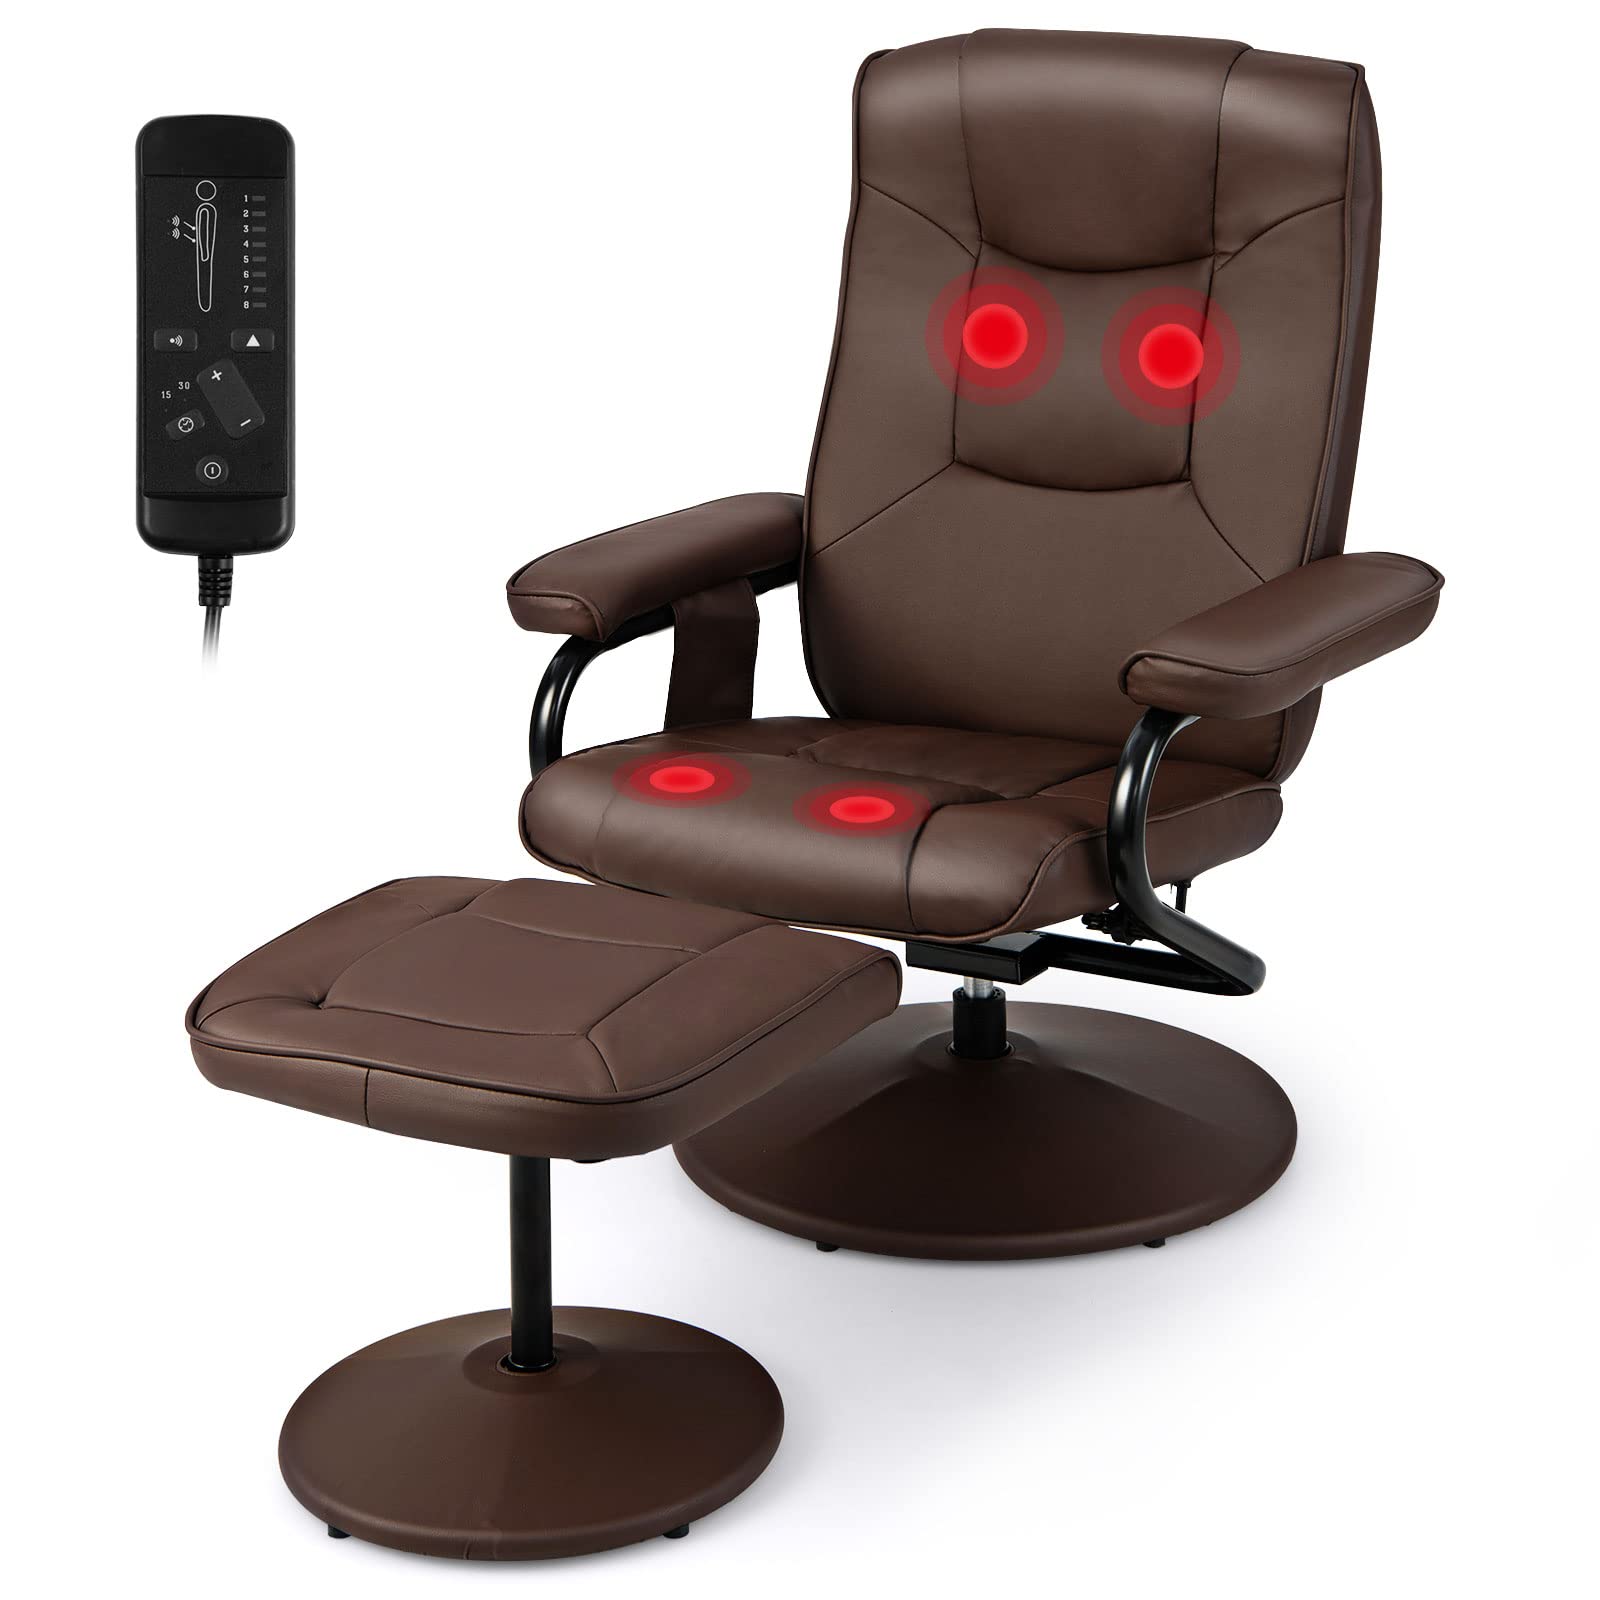 Giantex Recliner Chair with Ottoman, 360° Swivel Lounge Chair with Vibration Massage, Remote Control